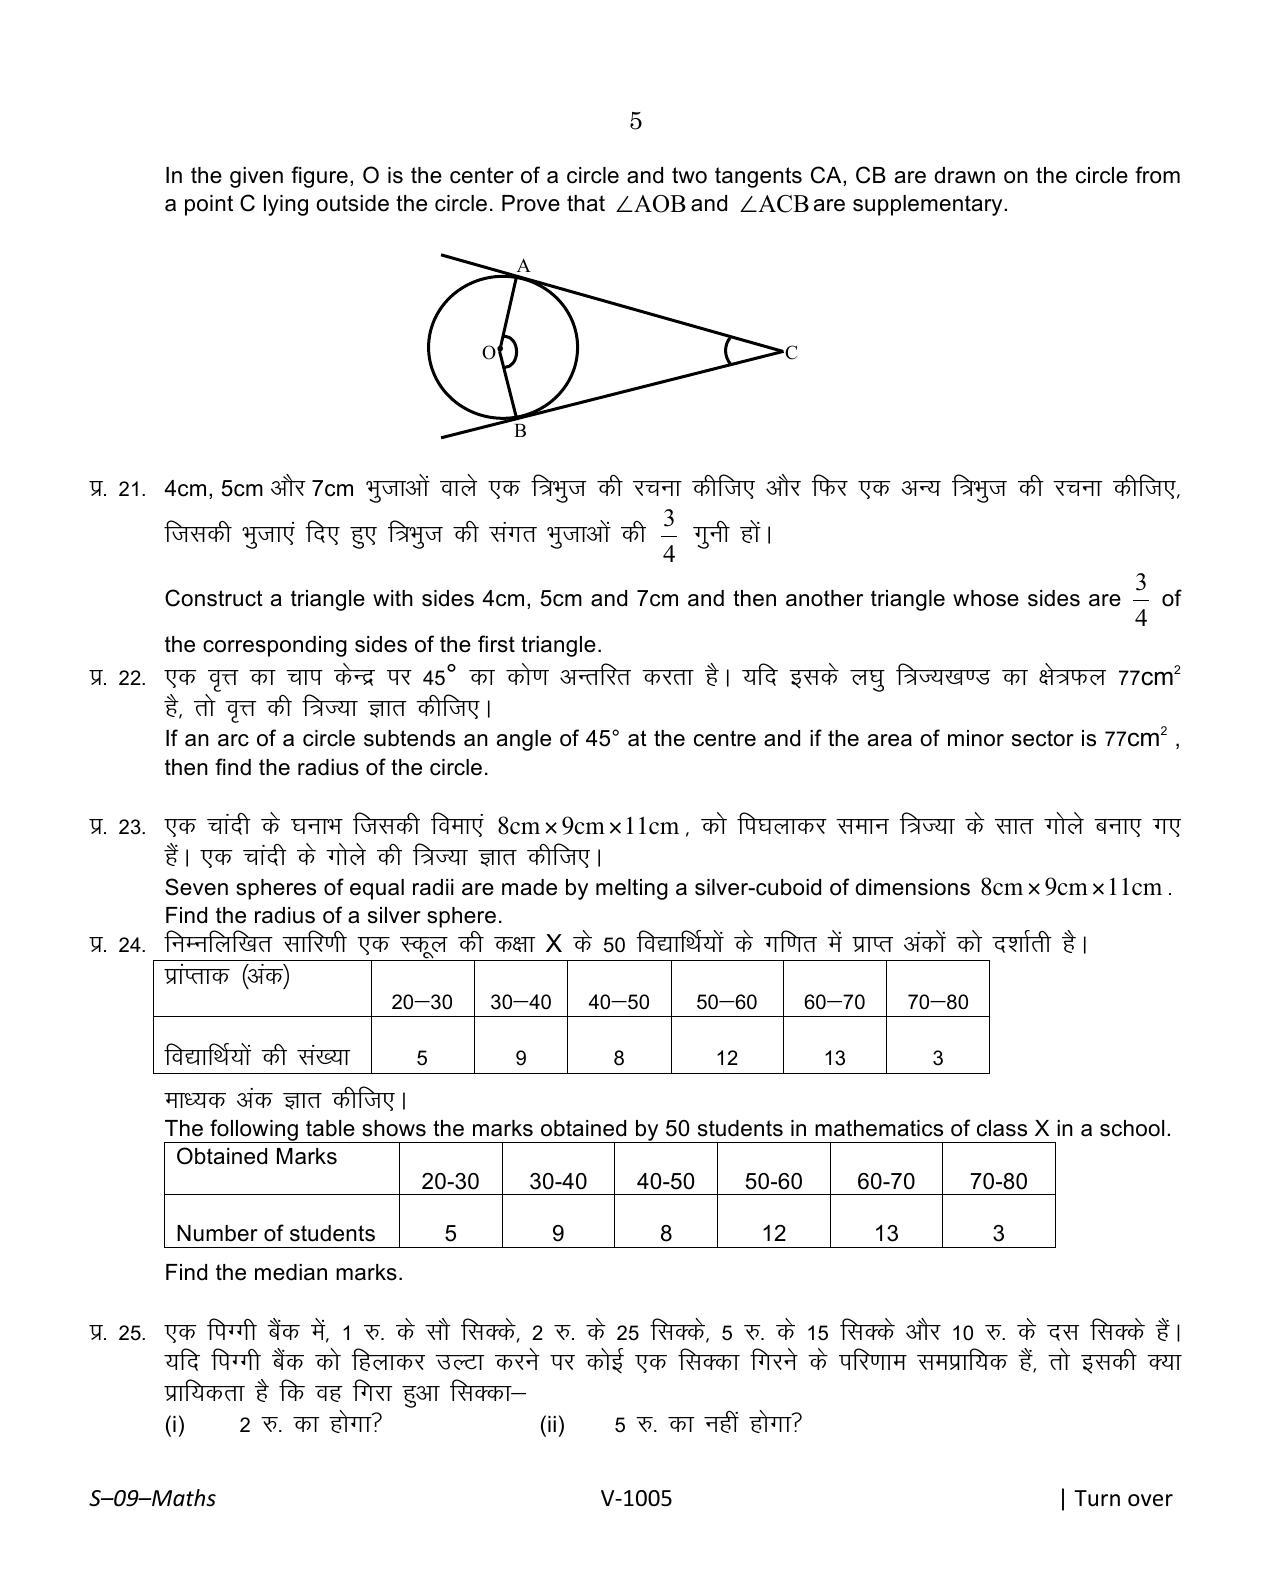 RBSE Class 10 Mathematics 2016 Question Paper - Page 5